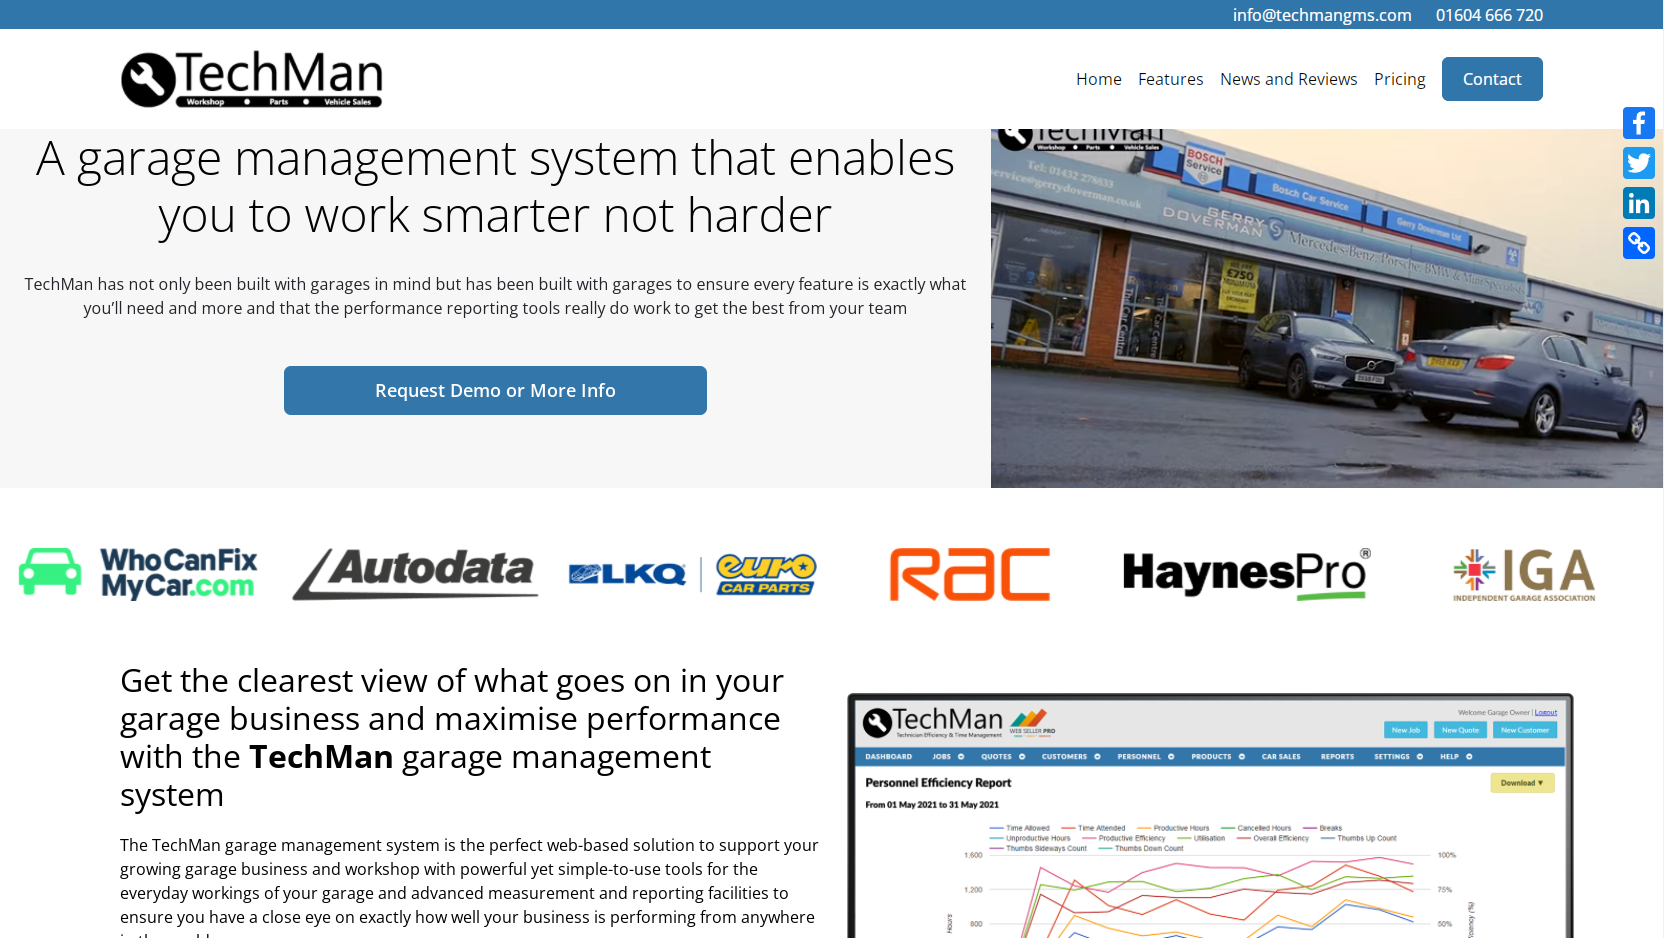 New website for TechMan as company aims for "massive 2022"